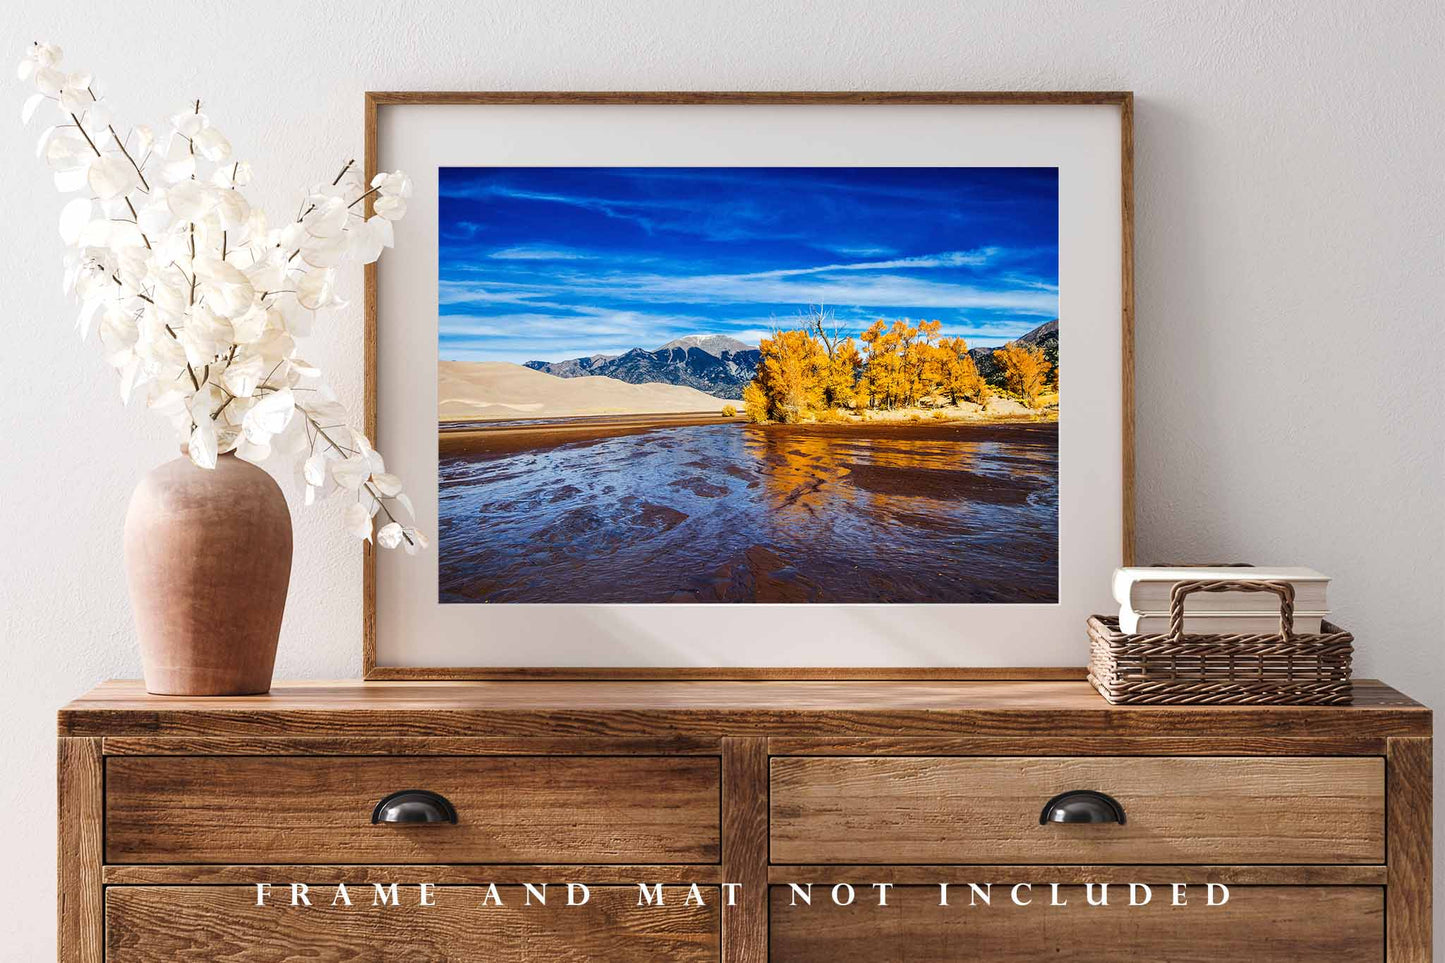 Rocky Mountain Photography Print (Not Framed) Picture of Medano Creek and Trees with Fall Color on Autumn Day in Great Sand Dunes National Park Colorado Western Wall Art Nature Decor